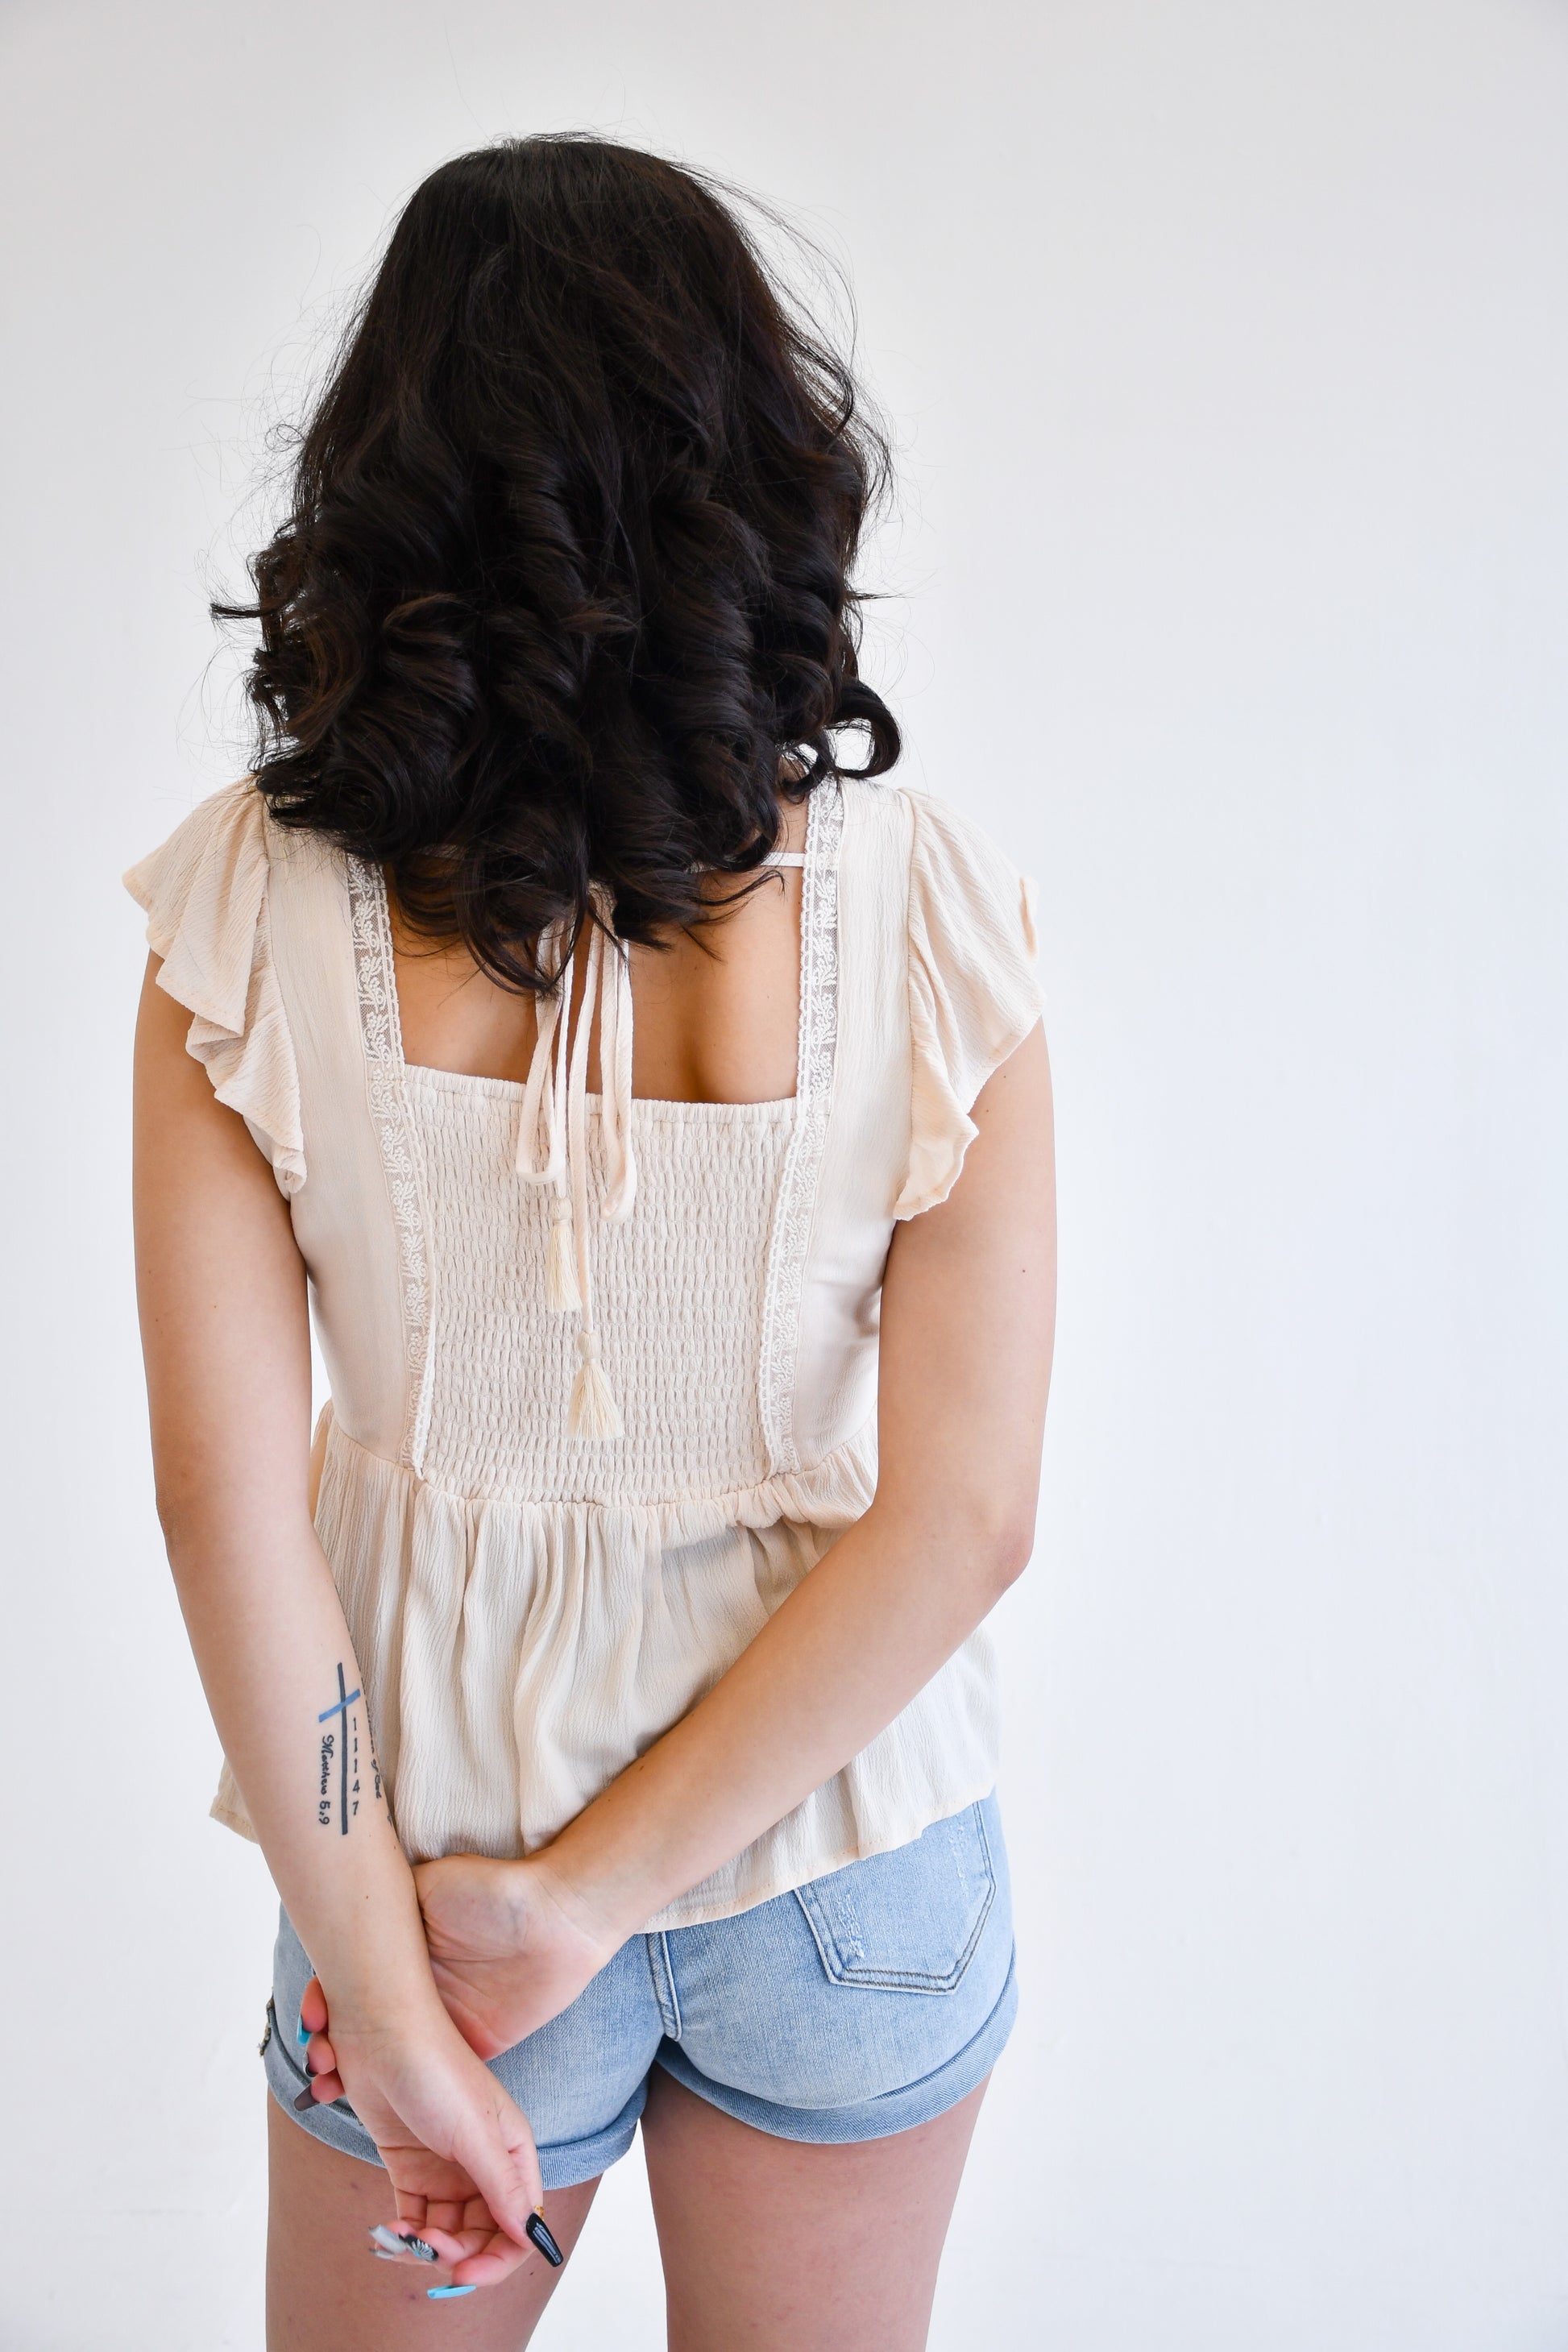 Endearing Lace Top,Tops,FLOWY, FLUTTER SLEEVE, LACE, TIE, V-NECK- DEFIANT